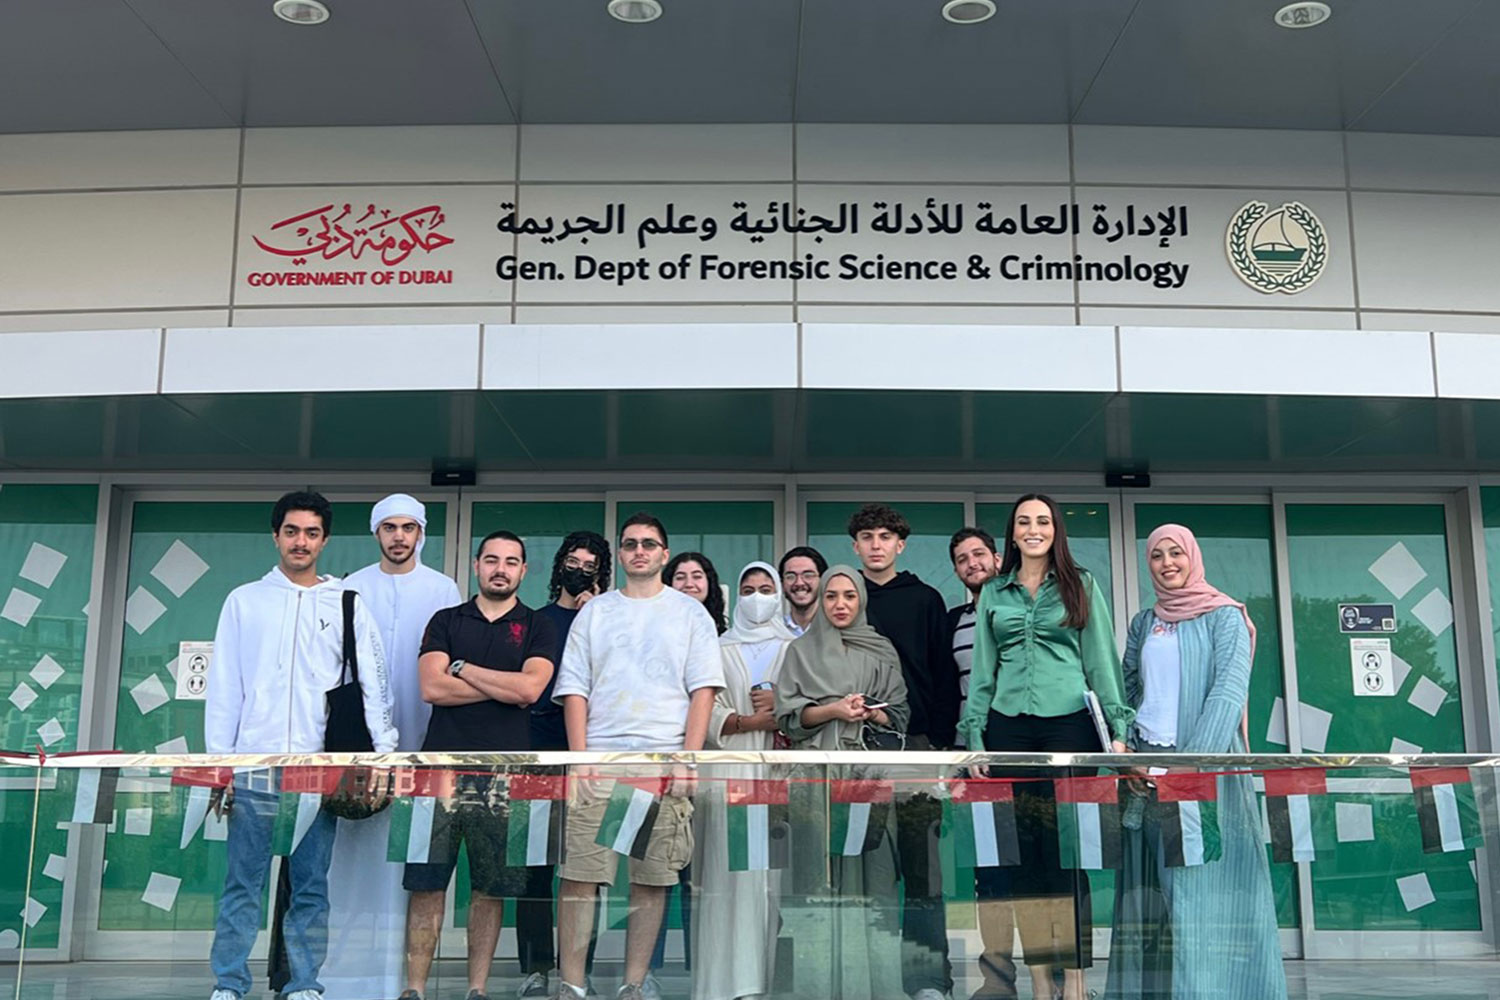 Educational Trip to the General Department of Forensic Science & Criminology